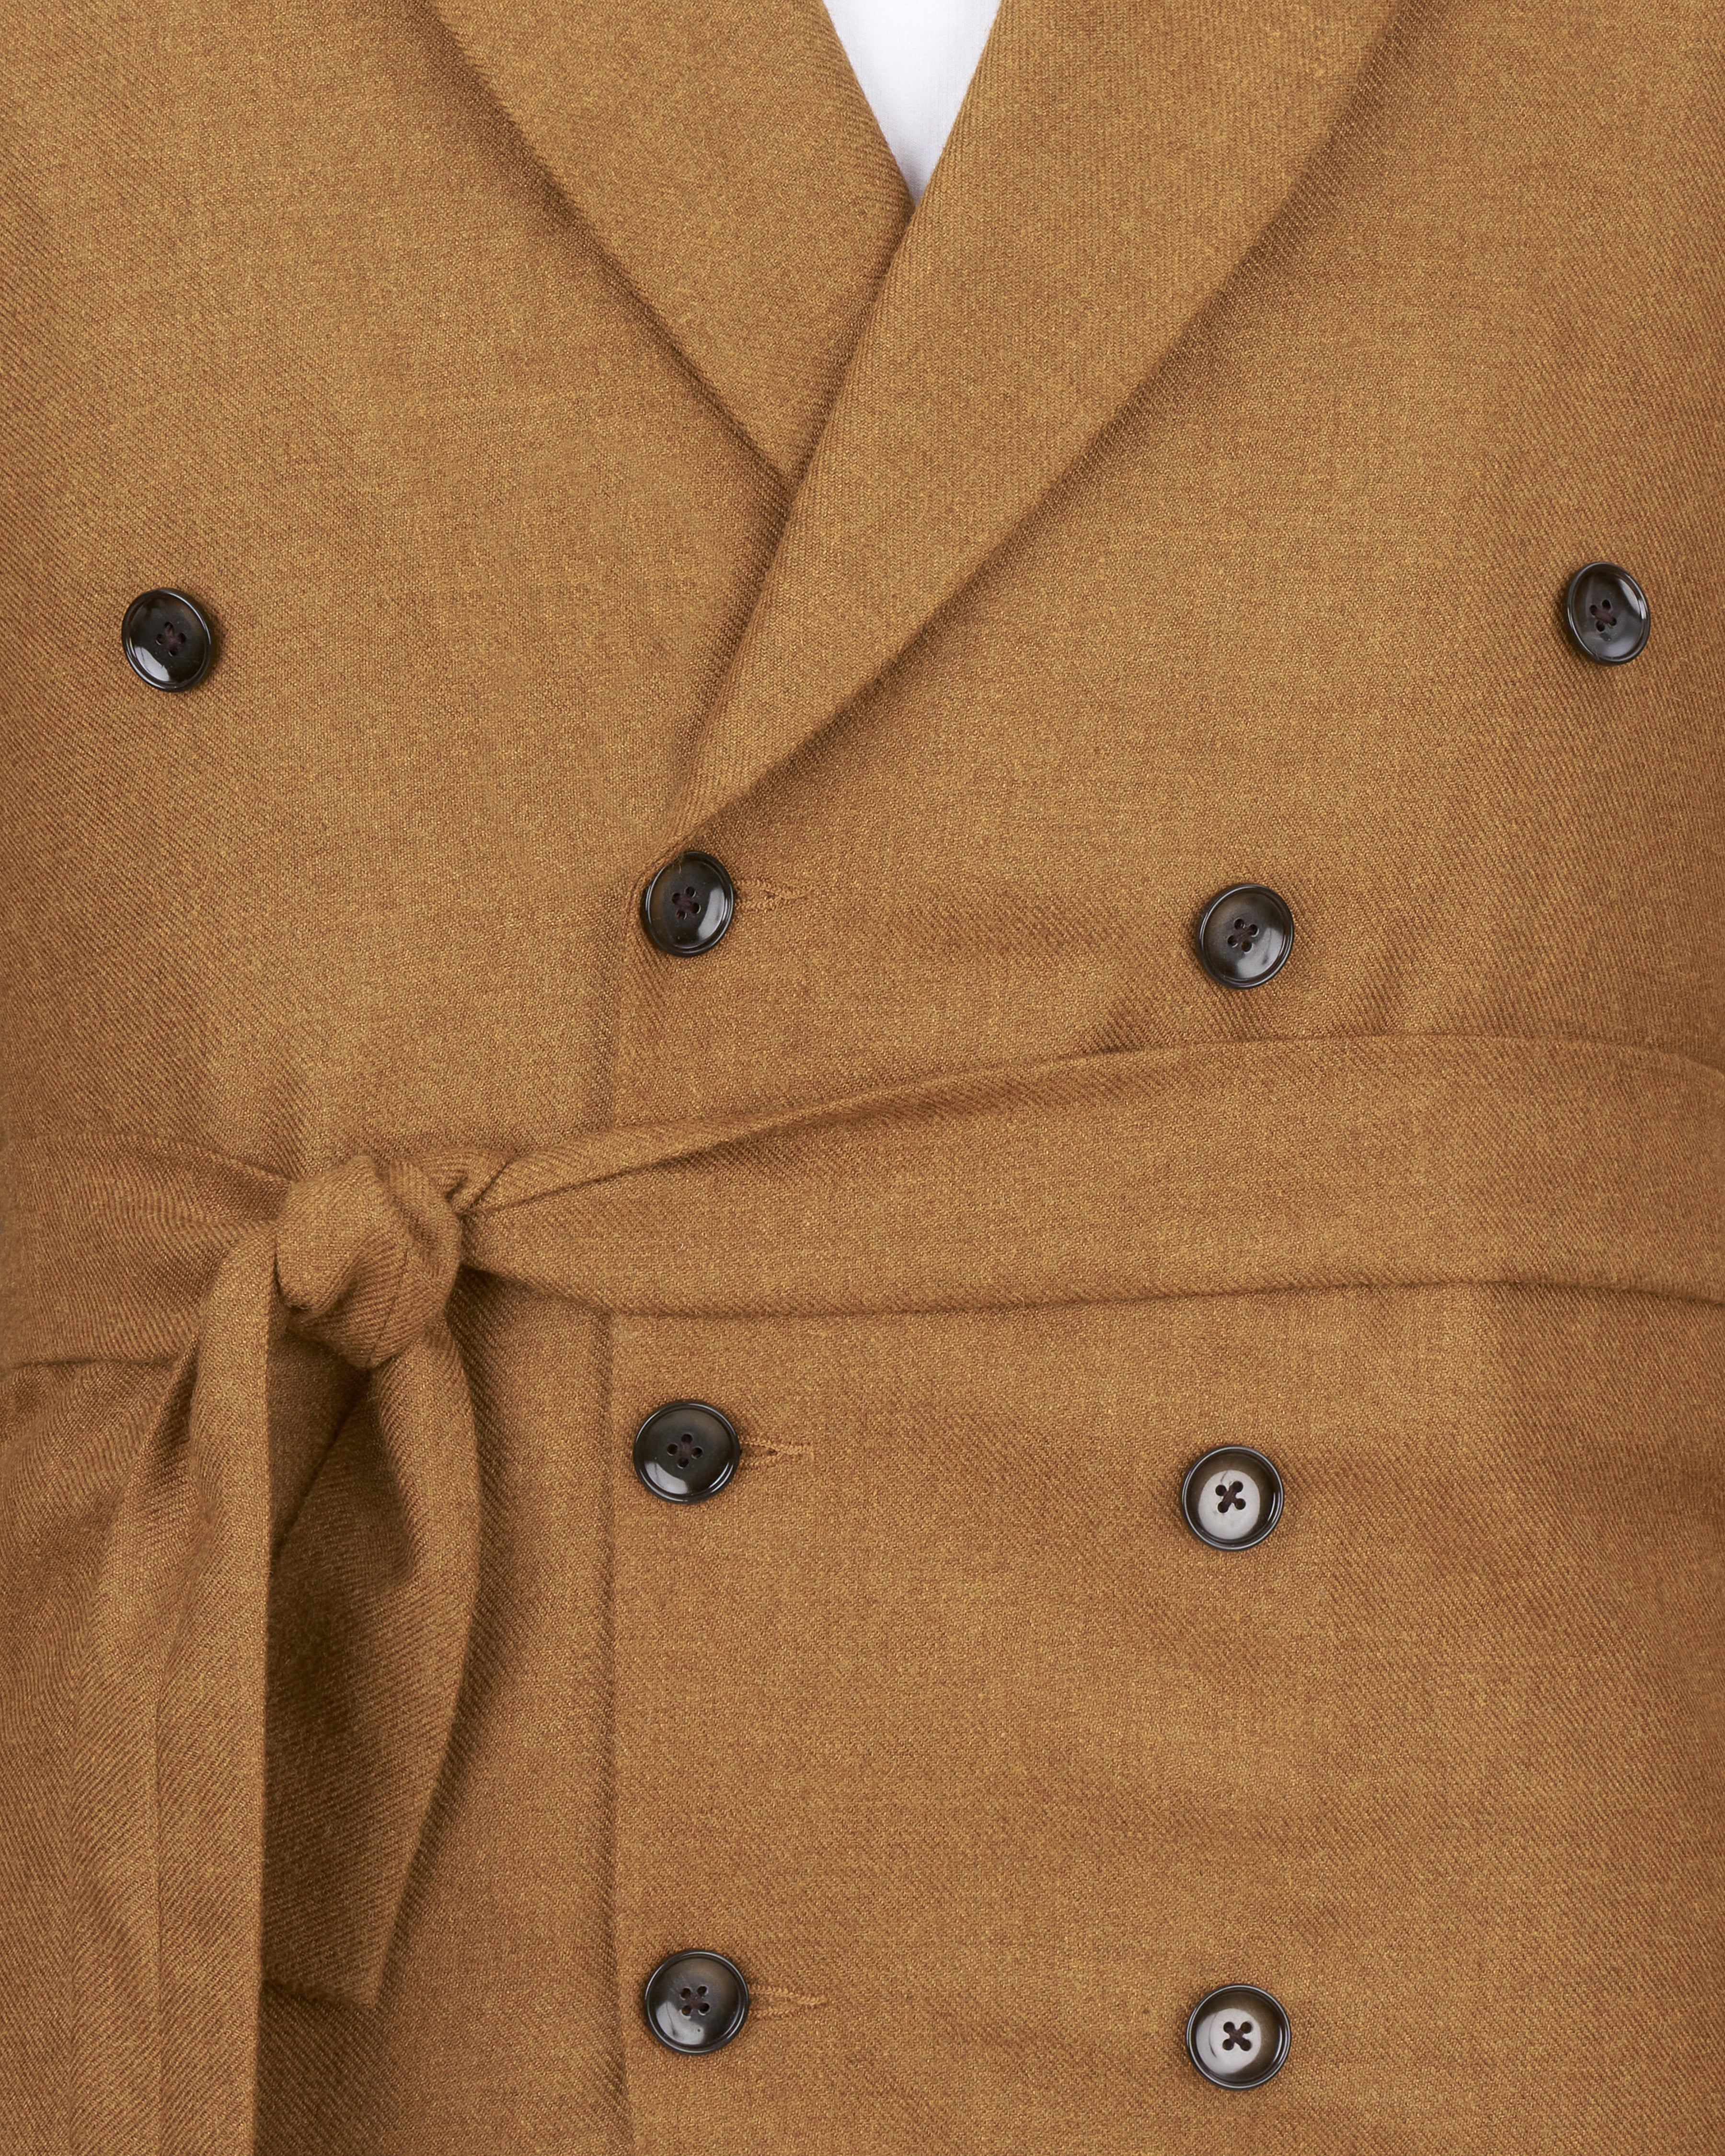 Cape Palliser Brown Wool Rich Double Breasted Trench Coat,TCB2530-DB-D35-36, TCB2530-DB-D35-38, TCB2530-DB-D35-40, TCB2530-DB-D35-42, TCB2530-DB-D35-44, TCB2530-DB-D35-46, TCB2530-DB-D35-48, TCB2530-DB-D35-50, TCB2530-DB-D35-53, TCB2530-DB-D35-54, TCB2530-DB-D35-56, TCB2530-DB-D35-58, TCB2530-DB-D35-60